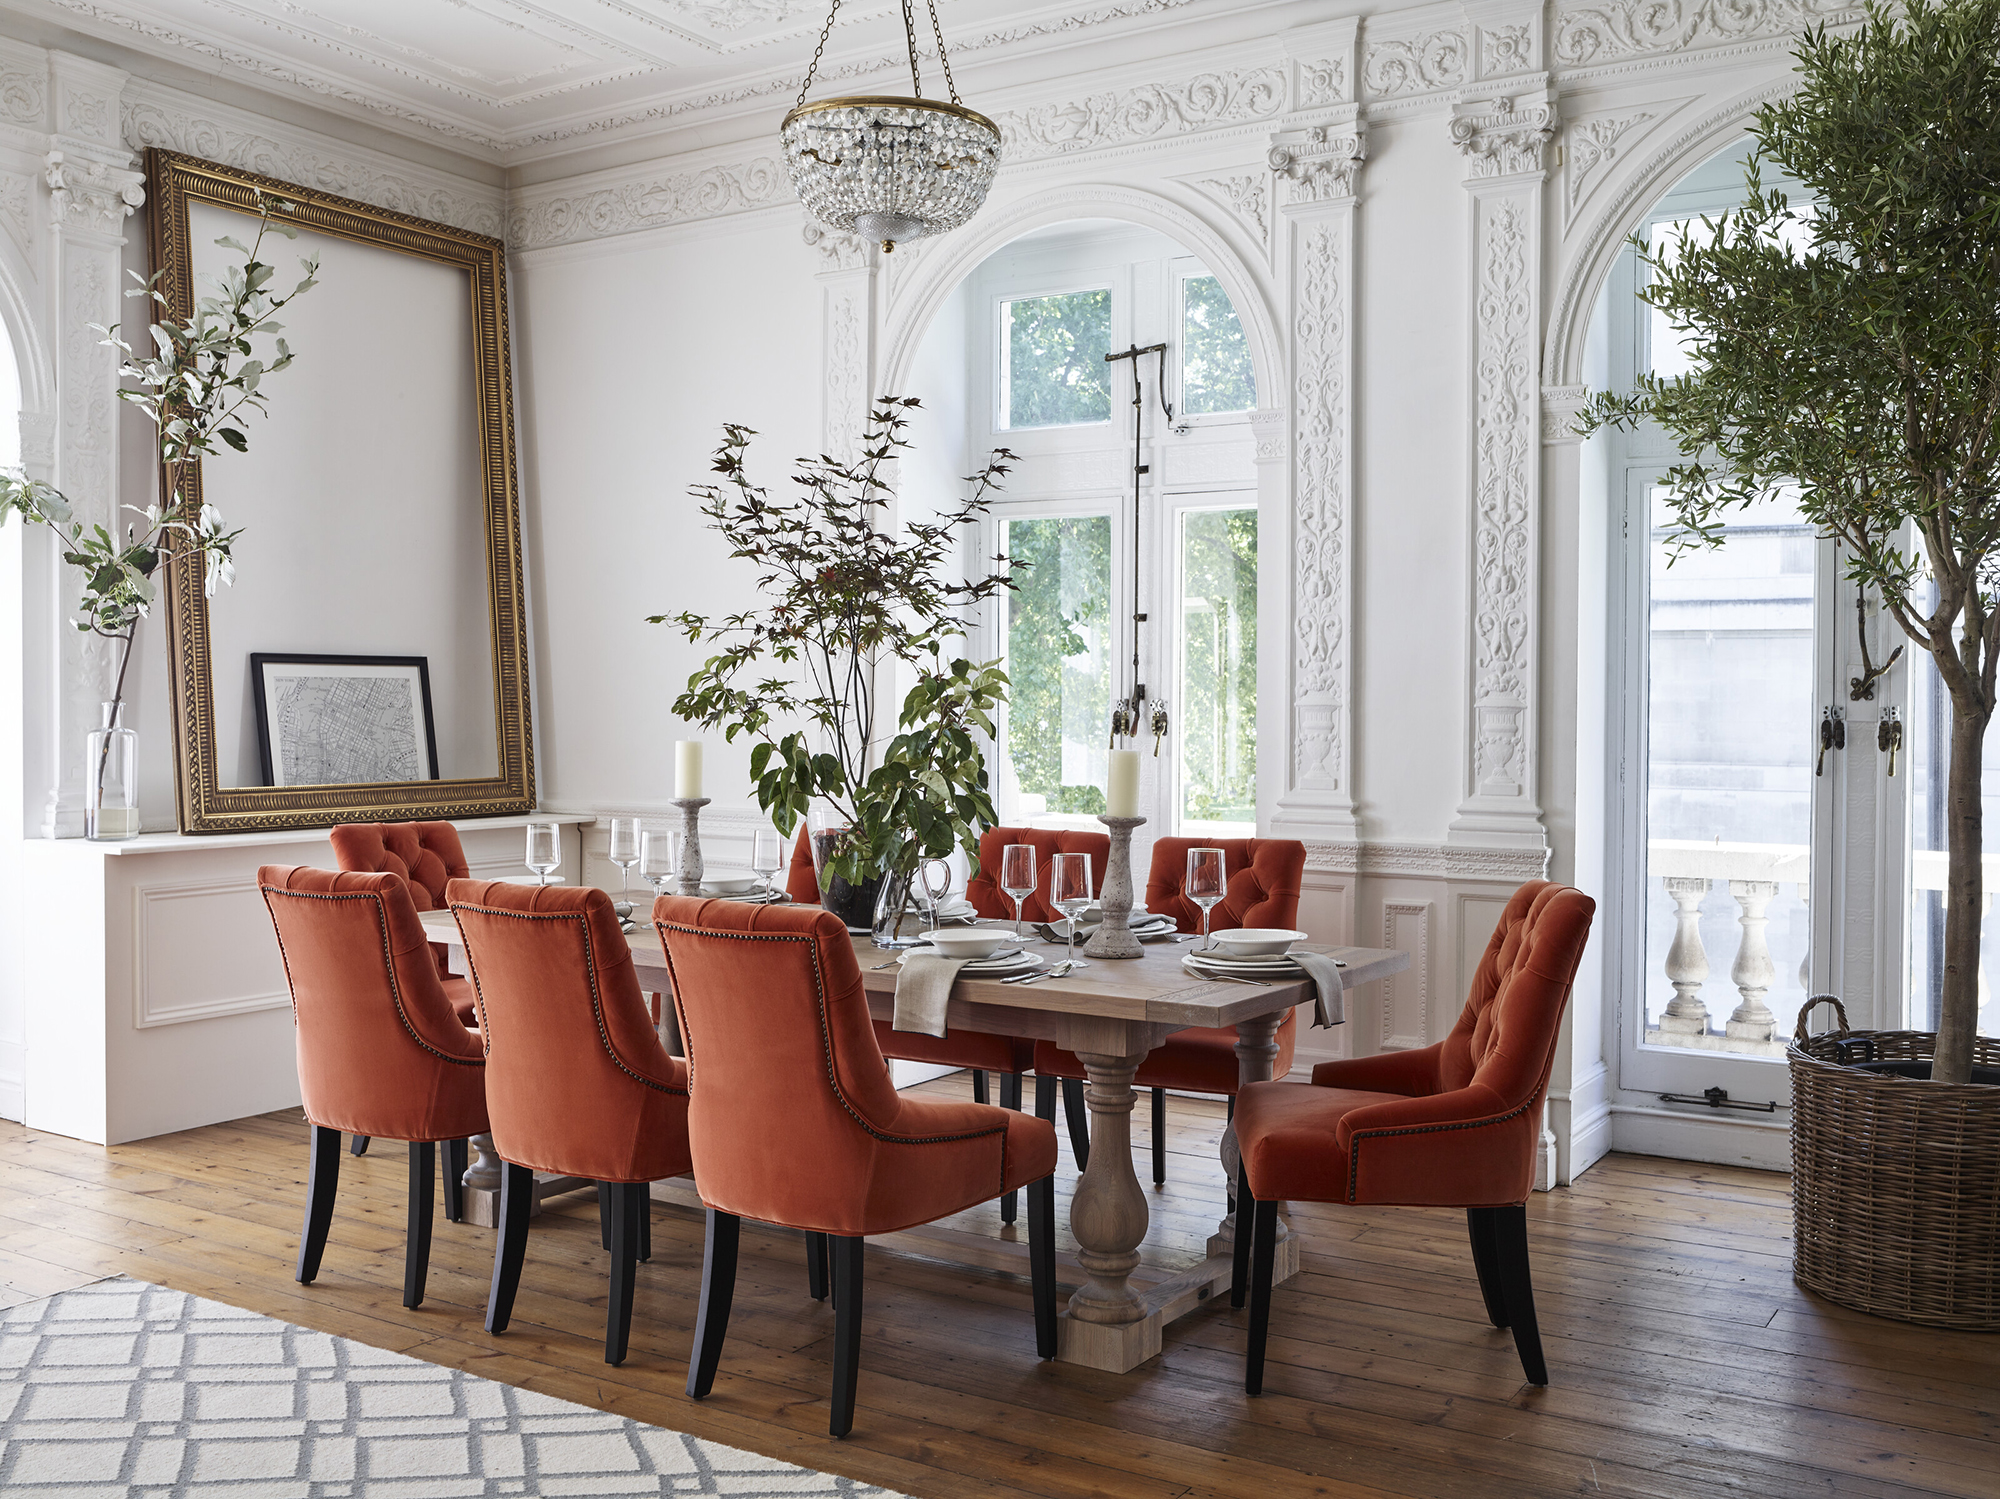 5 tips to help you choose the perfect dining chair – Ideal